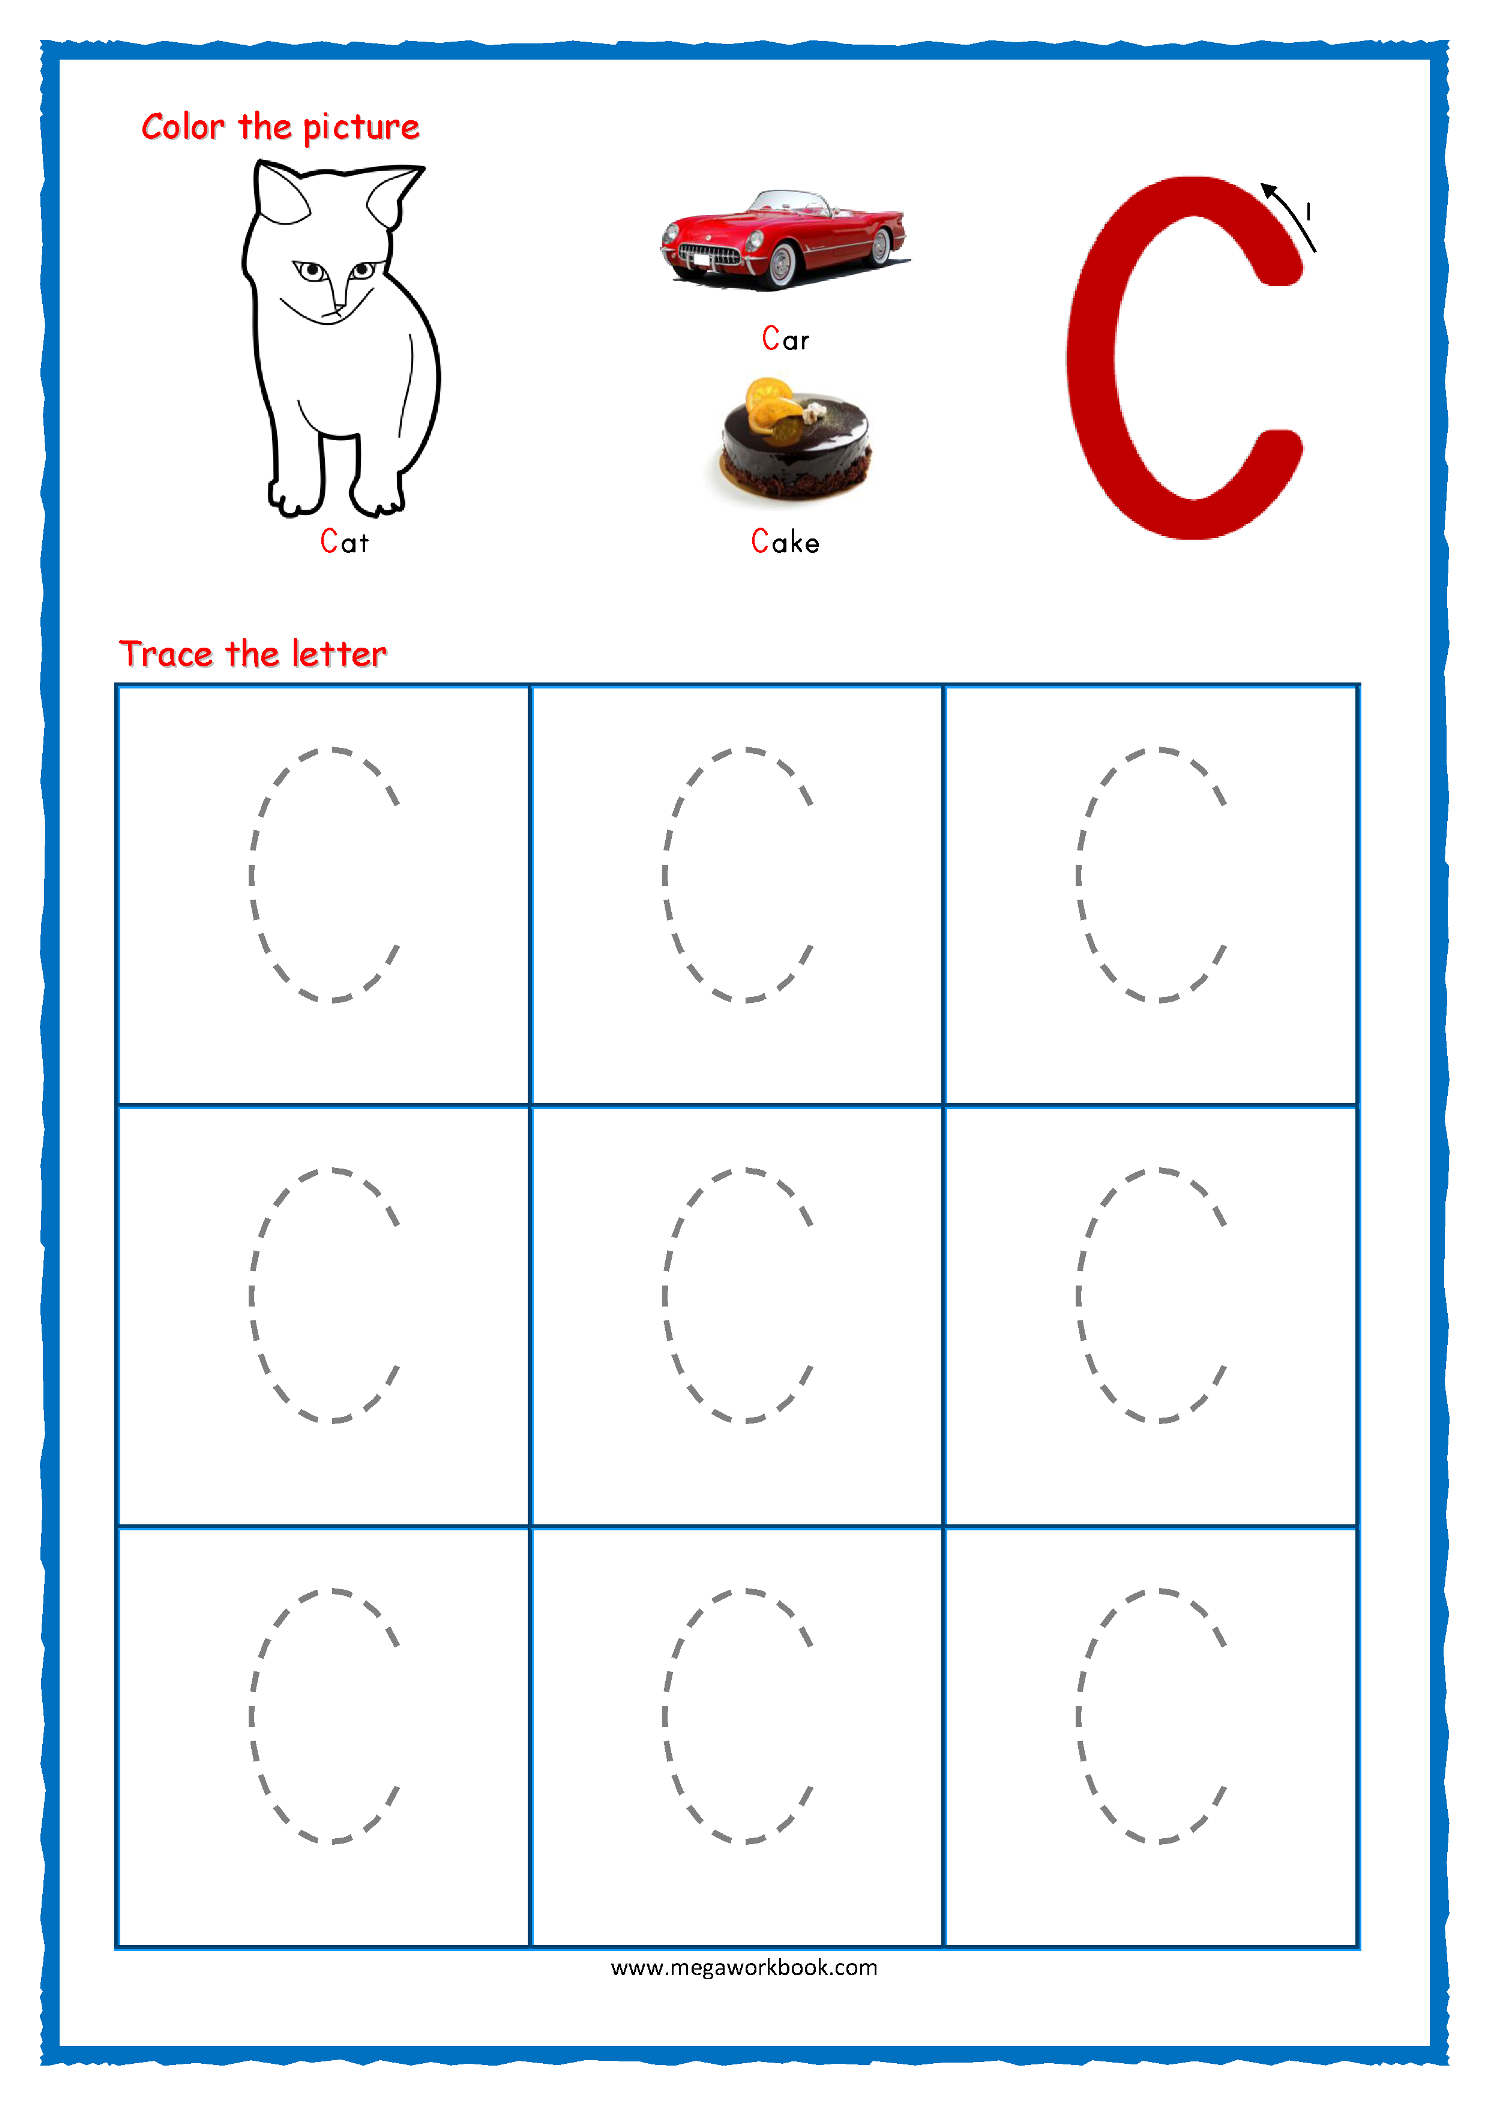 Tracing Letters - Alphabet Tracing - Capital Letters throughout Alphabet Tracing Pages Pdf